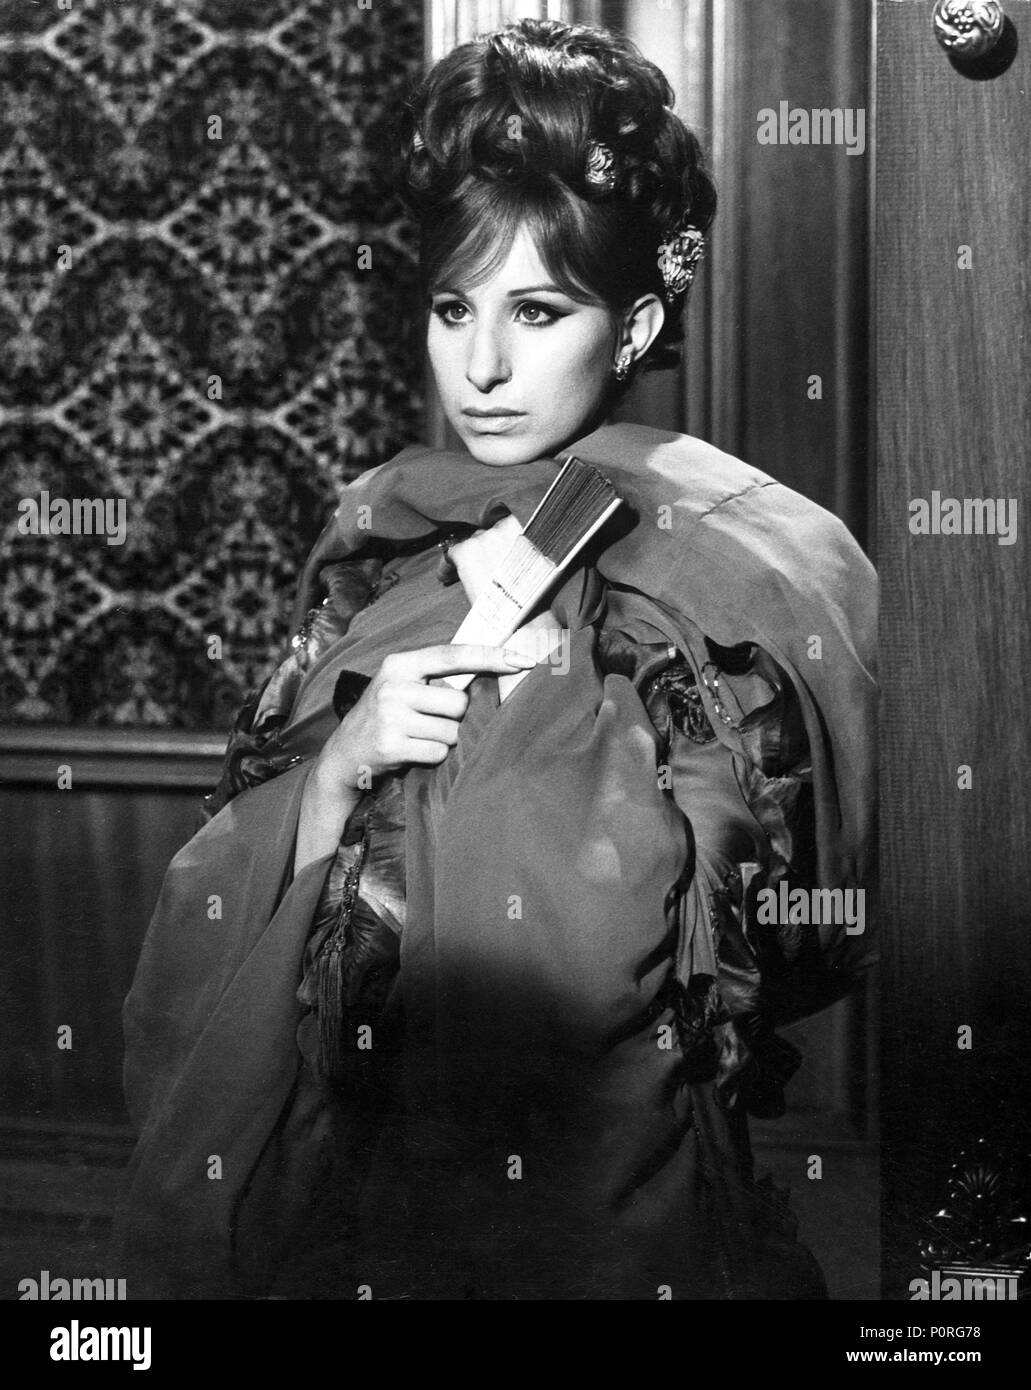 Original Film Title: FUNNY GIRL.  English Title: FUNNY GIRL.  Film Director: WILLIAM WYLER.  Year: 1968.  Stars: BARBRA STREISAND. Credit: COLUMBIA PICTURES / Album Stock Photo